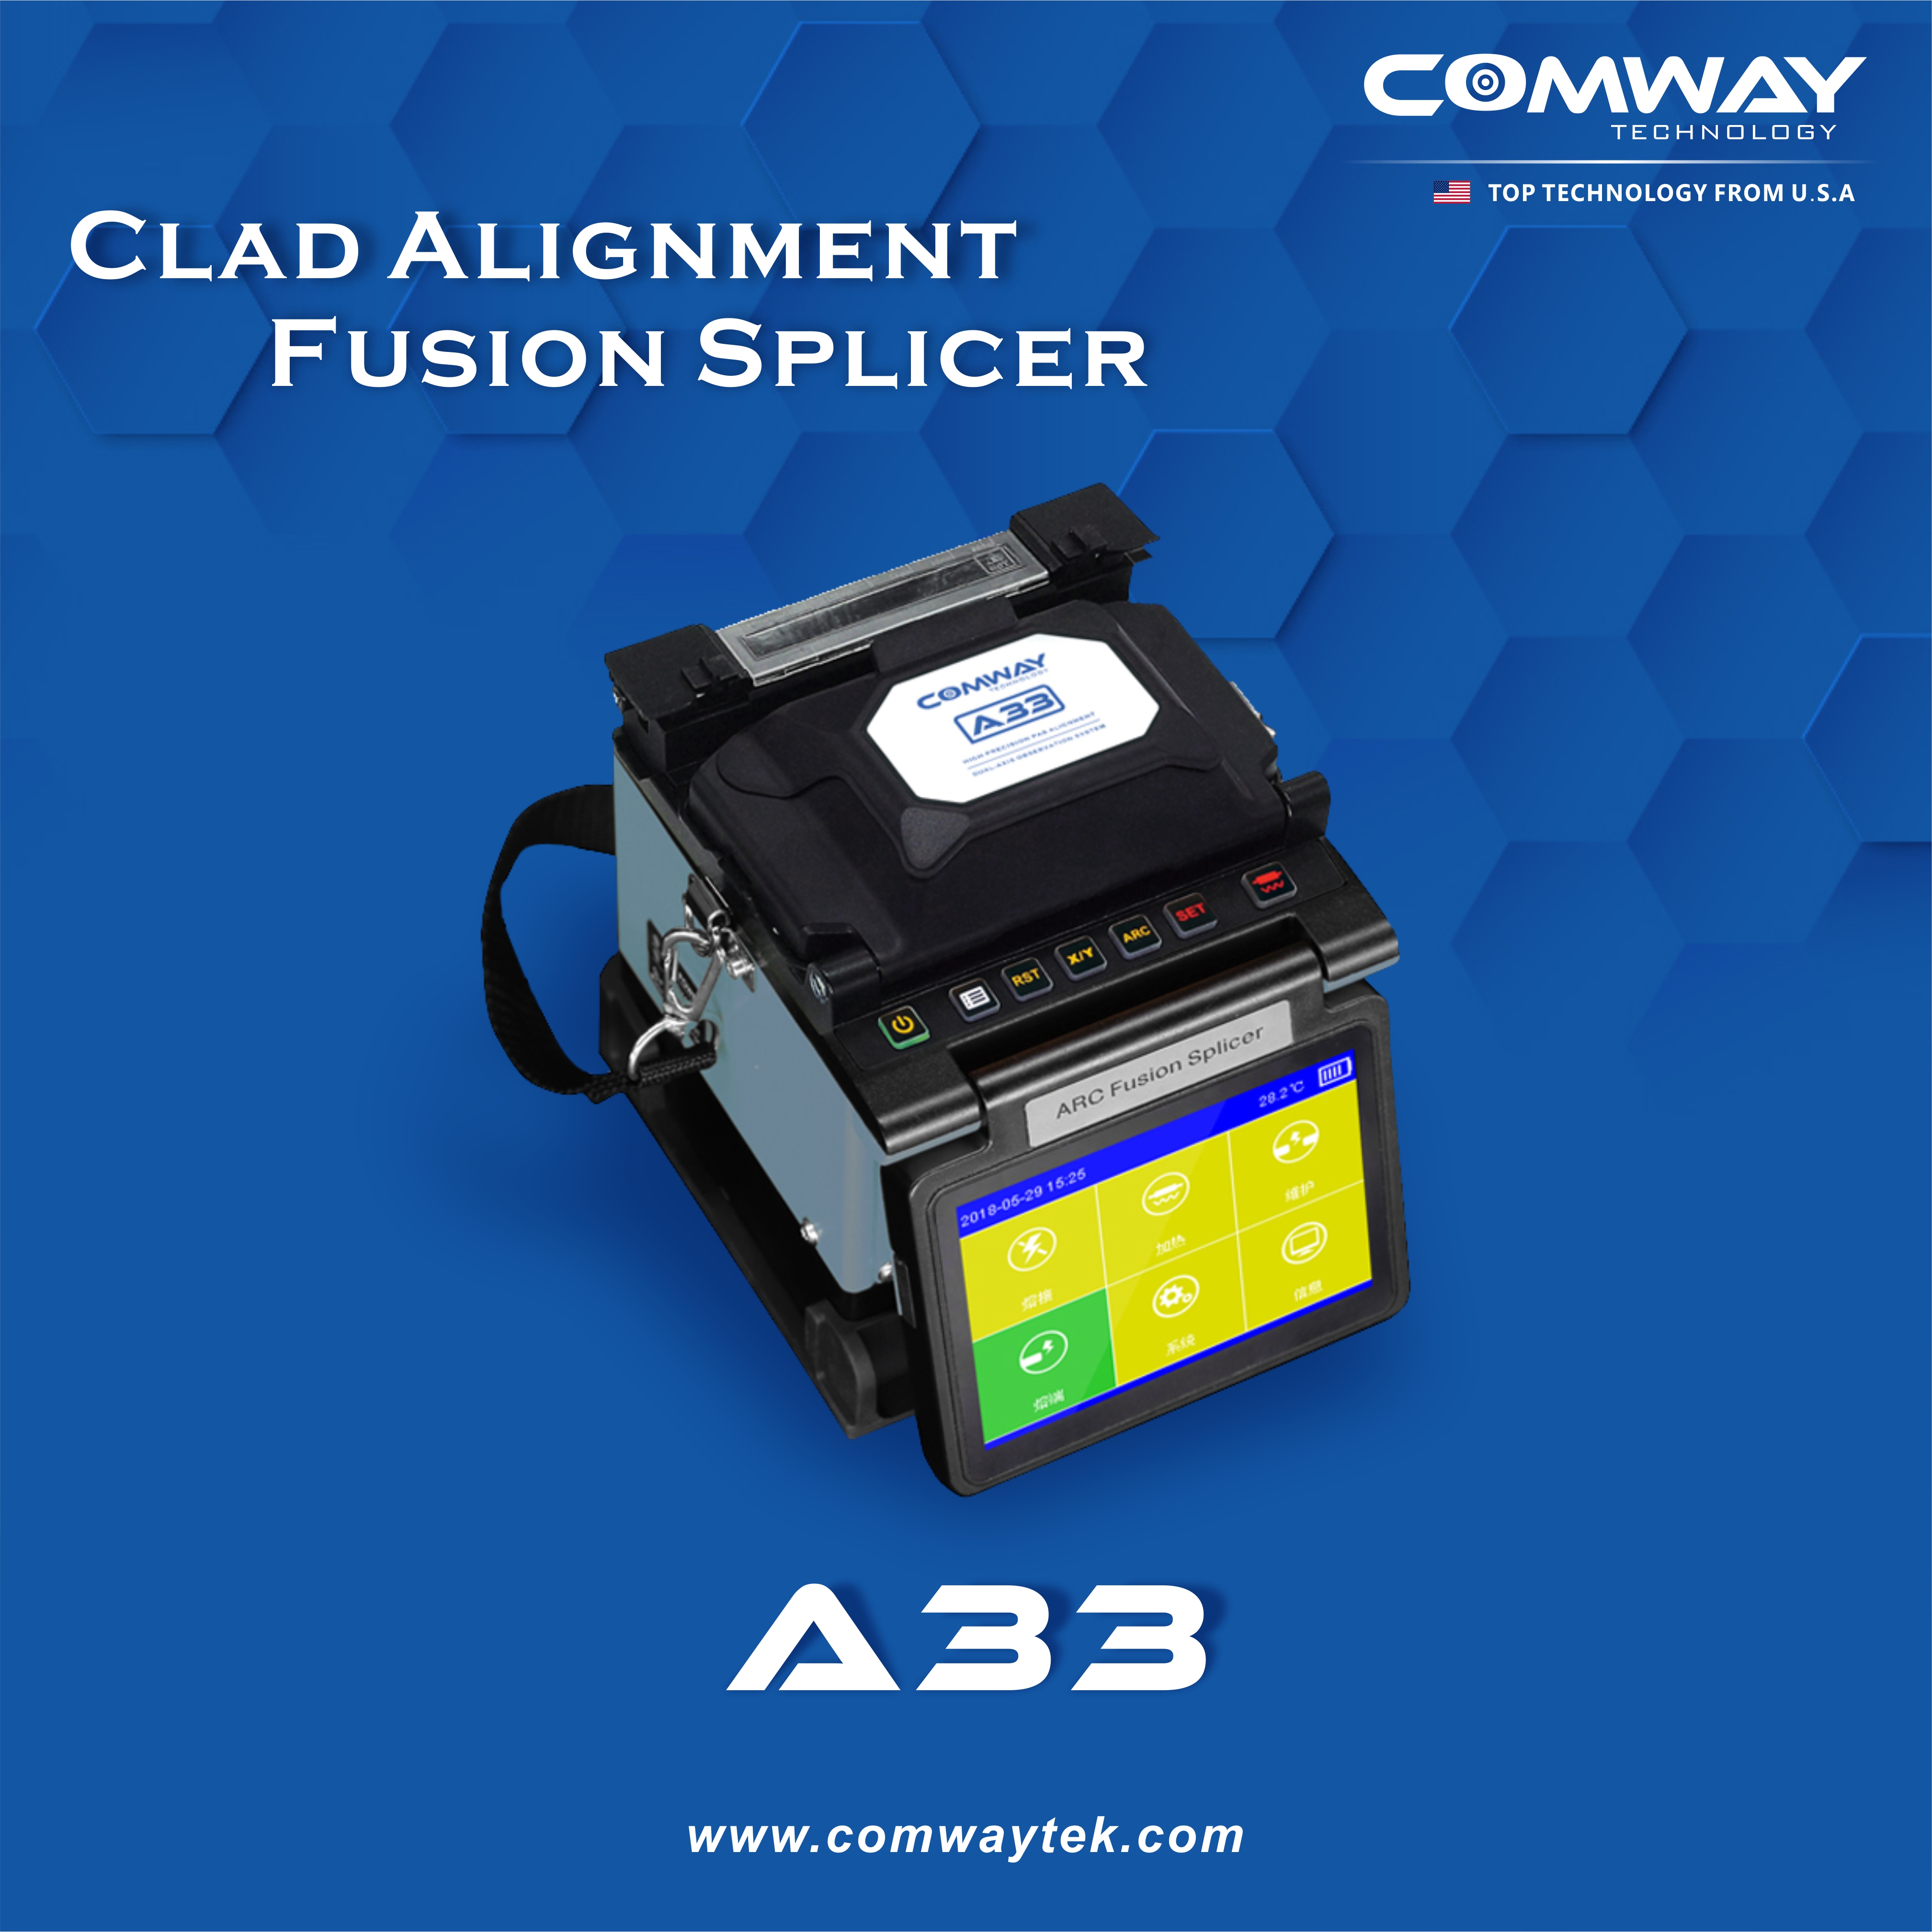 COMWAY A33 Fusion Splicer